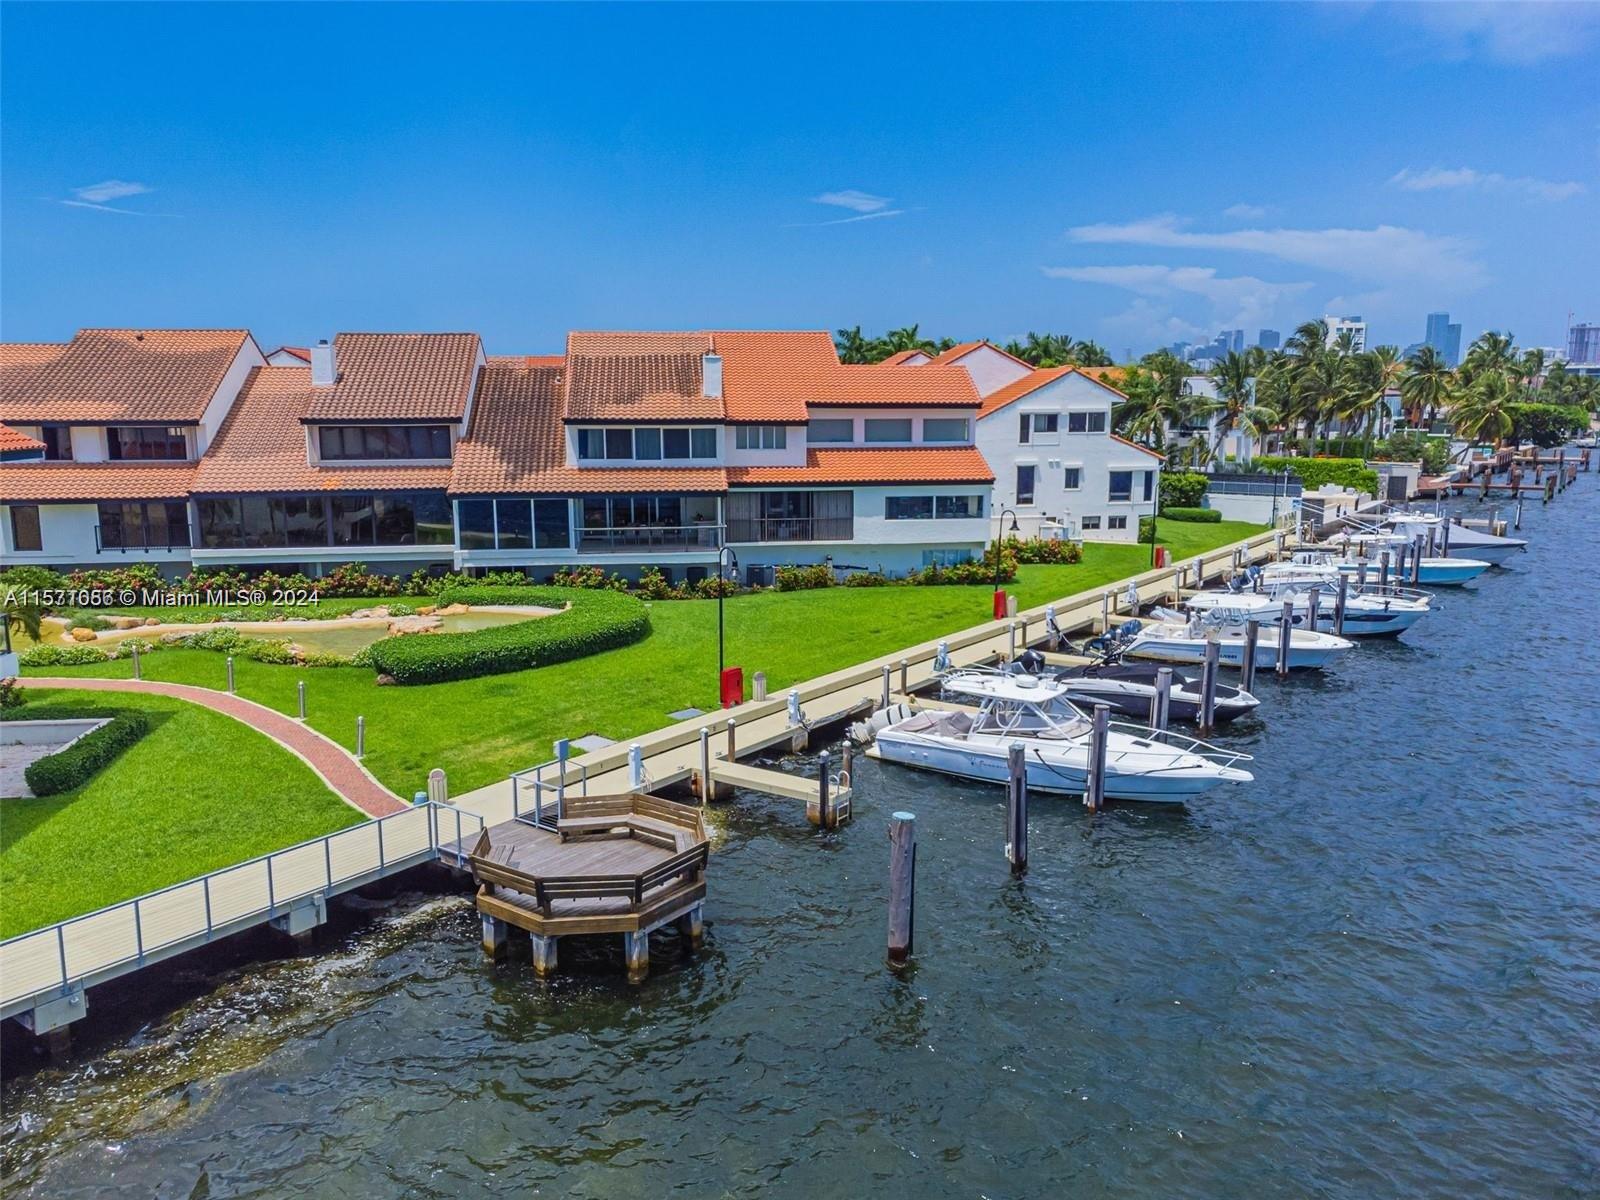 On highly desired South Bayshore Drive, L'Hermitage is a private 24hr guarded Waterfront Community in Coconut Grove of 75 tri-level luxury residences. FULLY renovated with new roof, surrounded by lavish landscaping, enjoy resort-style living, waterfront sports w/Bayfront Access Boat Dock, Pool House (Outdoor Kitchen/Jacuzzi/Steam Rm), 2 Tennis courts, just minutes away from Miami's BEST schools/parks/shops & beaches. 

Extra-large house (biggest in the community) - bigger than tax roll with 4,535 Sft